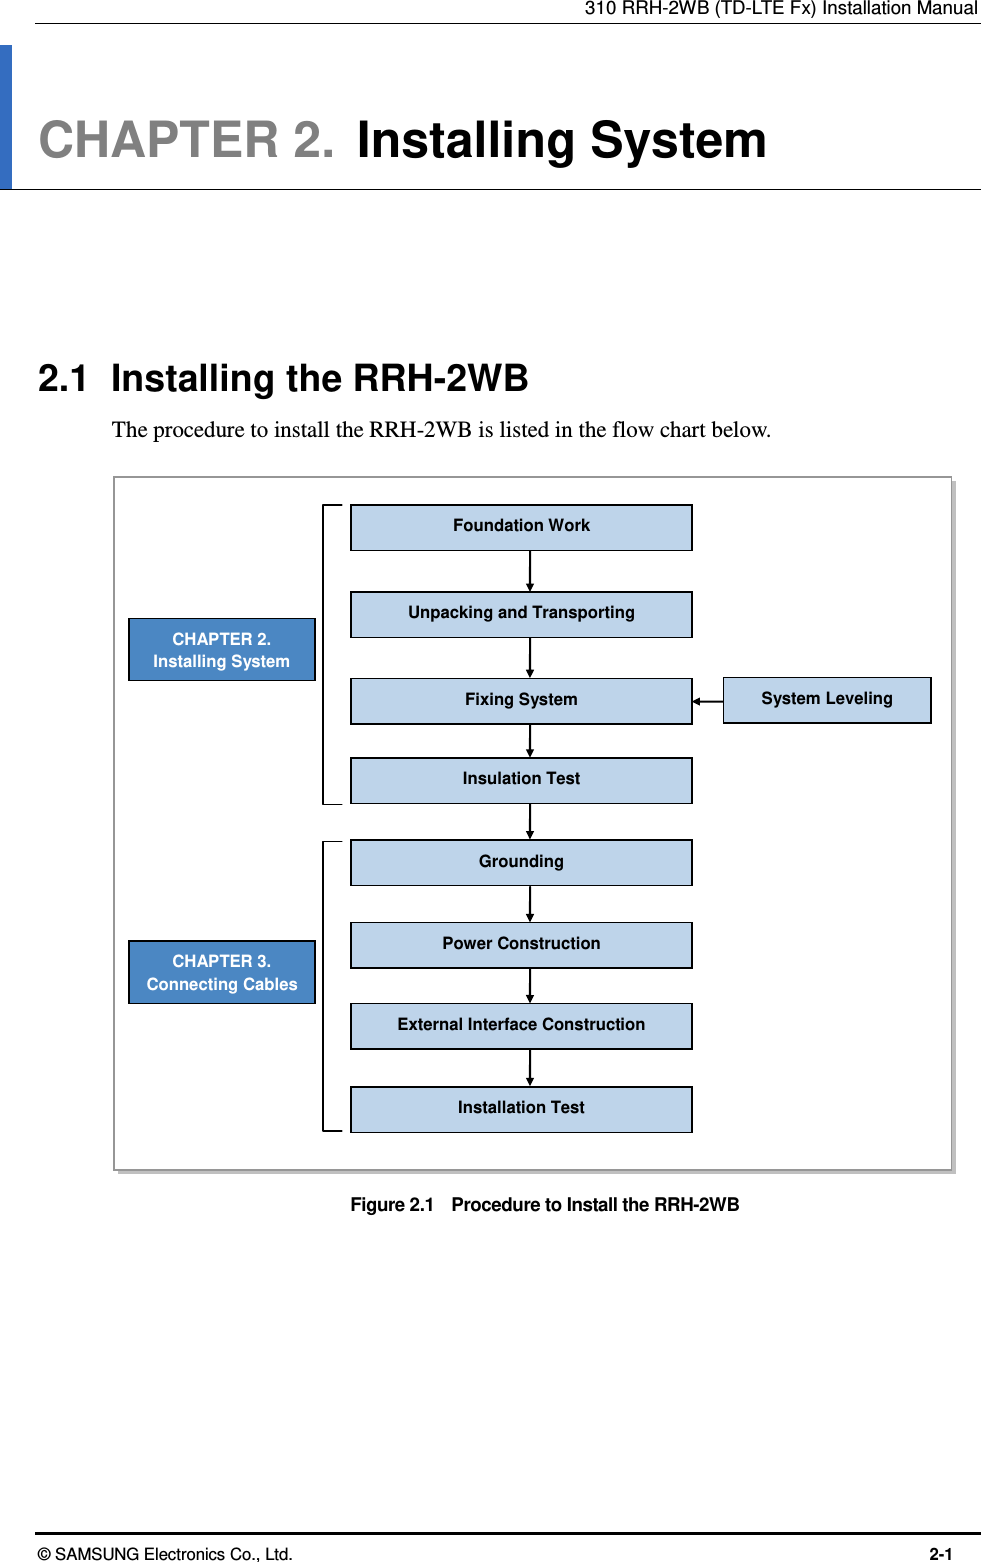 310 RRH-2WB (TD-LTE Fx) Installation Manual © SAMSUNG Electronics Co., Ltd.  2-1 CHAPTER 2.  Installing System      2.1  Installing the RRH-2WB The procedure to install the RRH-2WB is listed in the flow chart below.  Figure 2.1    Procedure to Install the RRH-2WB  Unpacking and Transporting Fixing System Grounding Power Construction  External Interface Construction  CHAPTER 2. Installing System CHAPTER 3. Connecting Cables Foundation Work Installation Test  Insulation Test System Leveling 